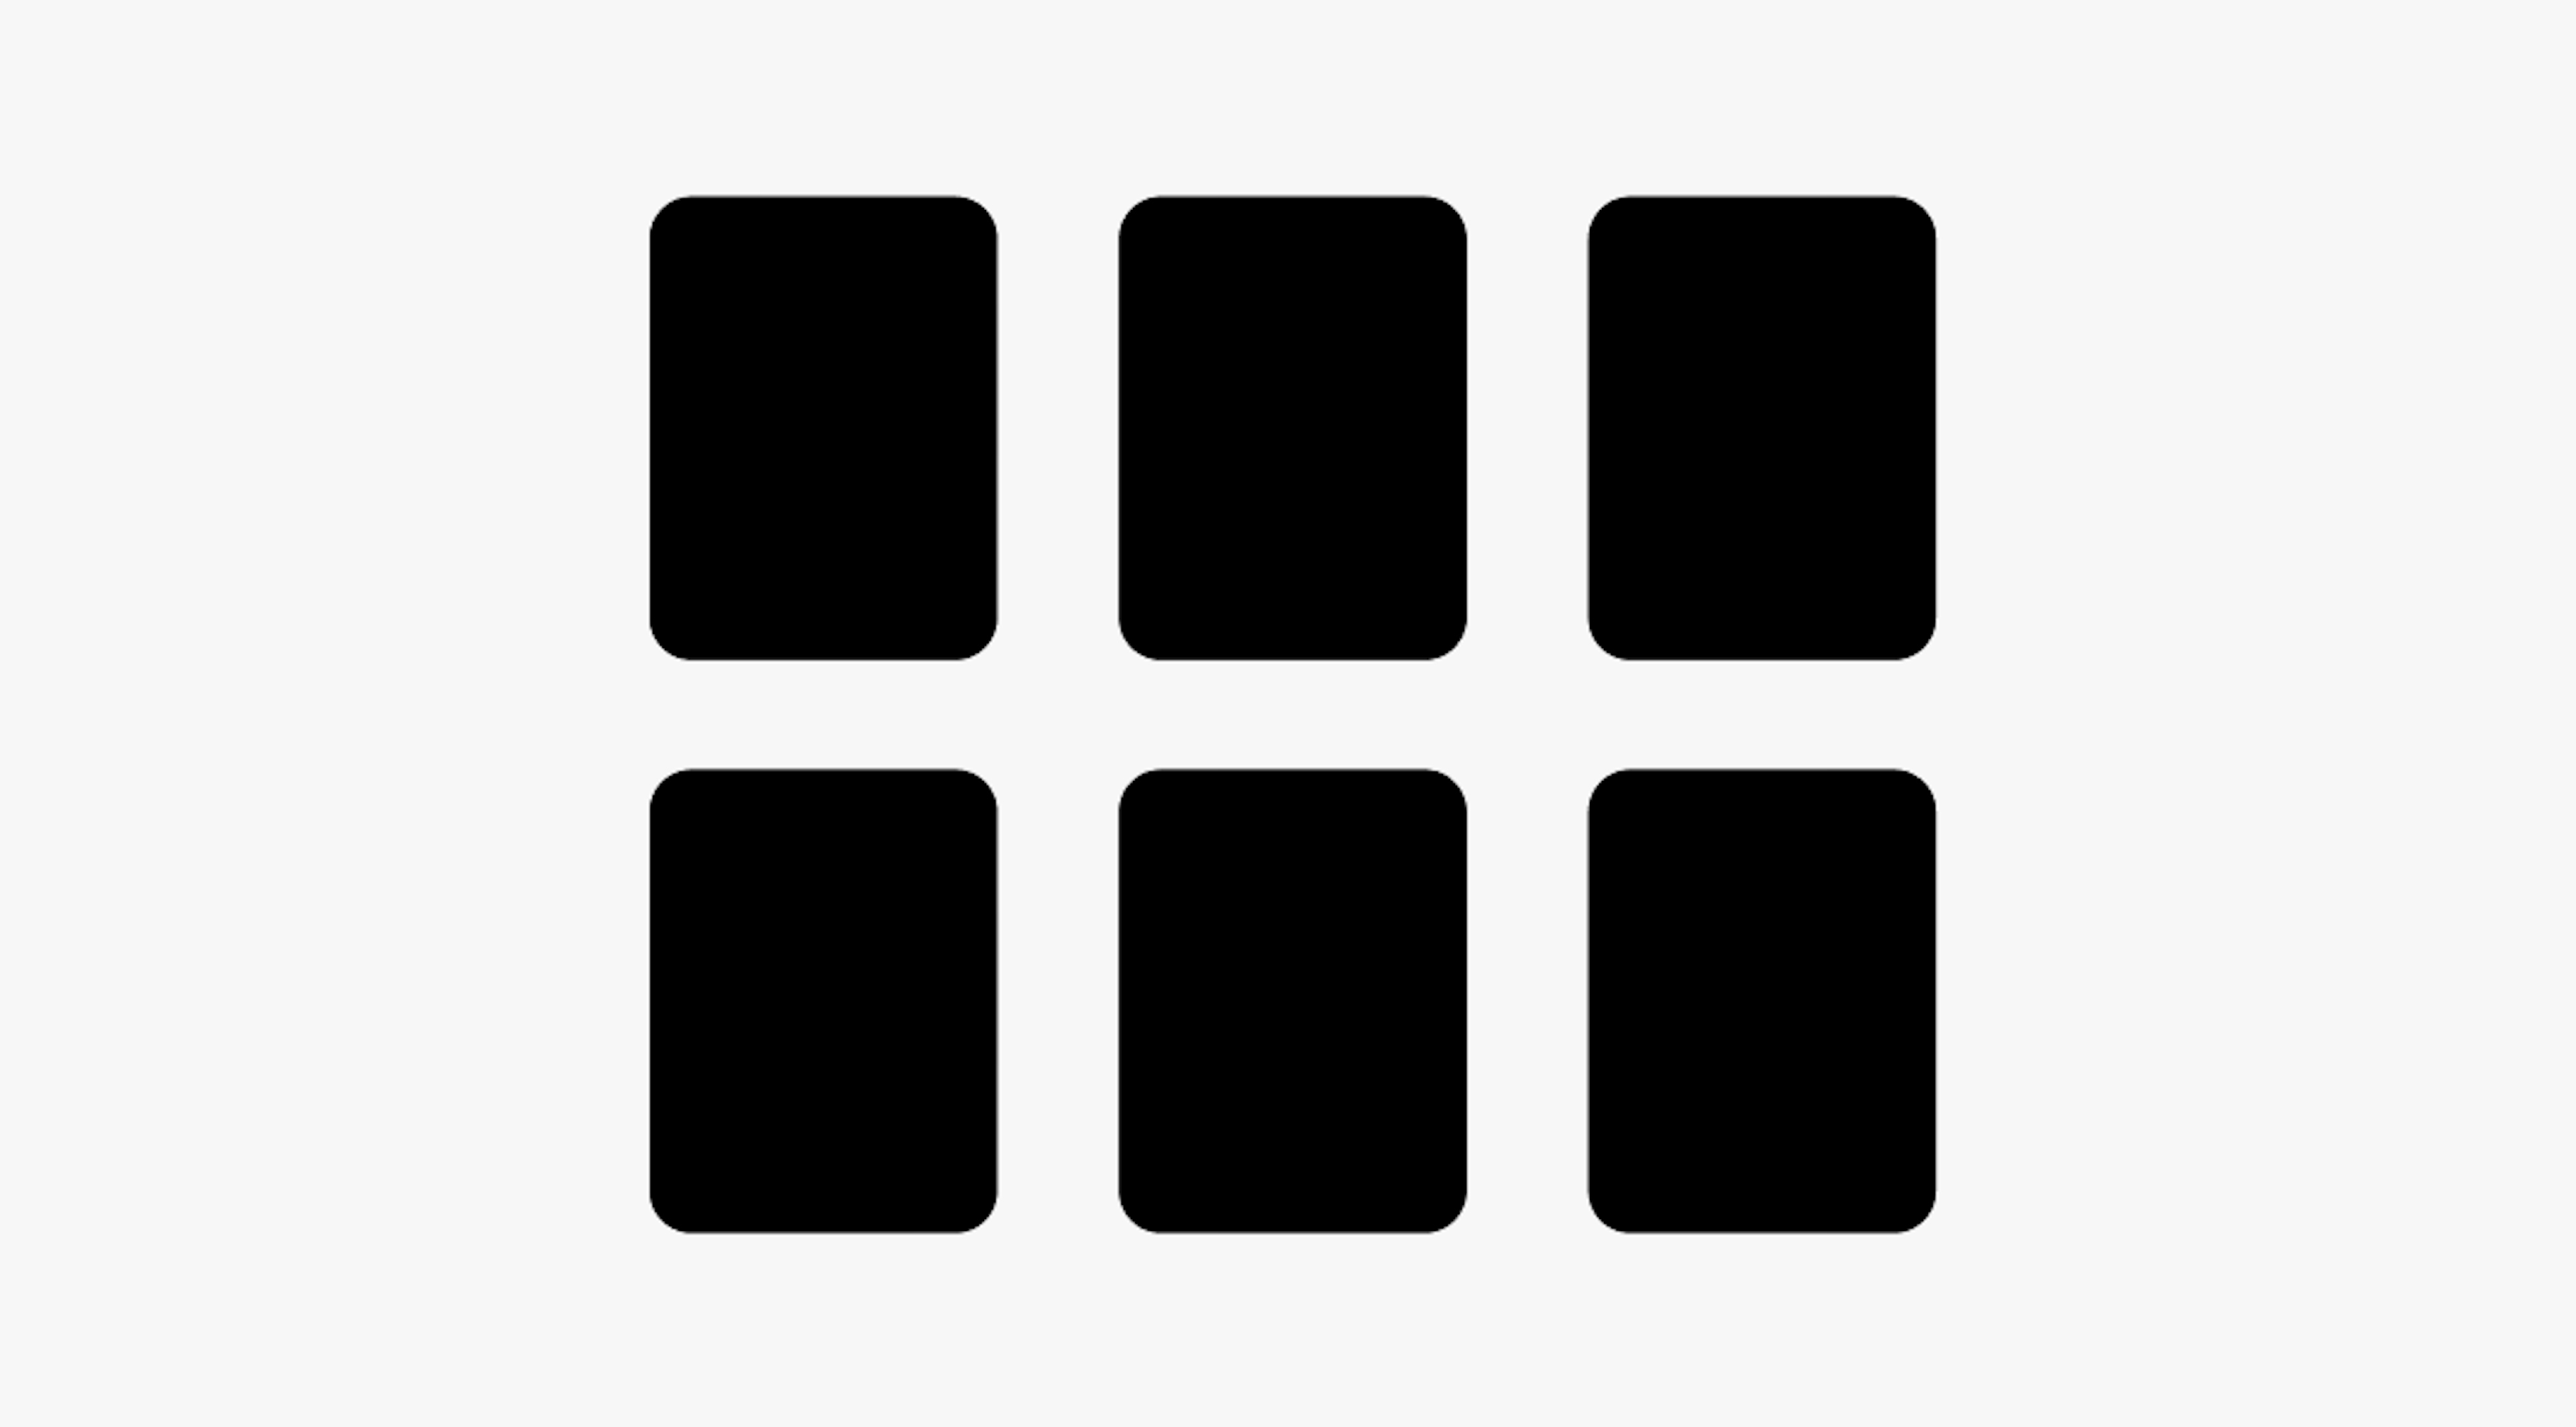 Graphic, black shapes stacked in a neat grid of 3 columns and 2 rows.